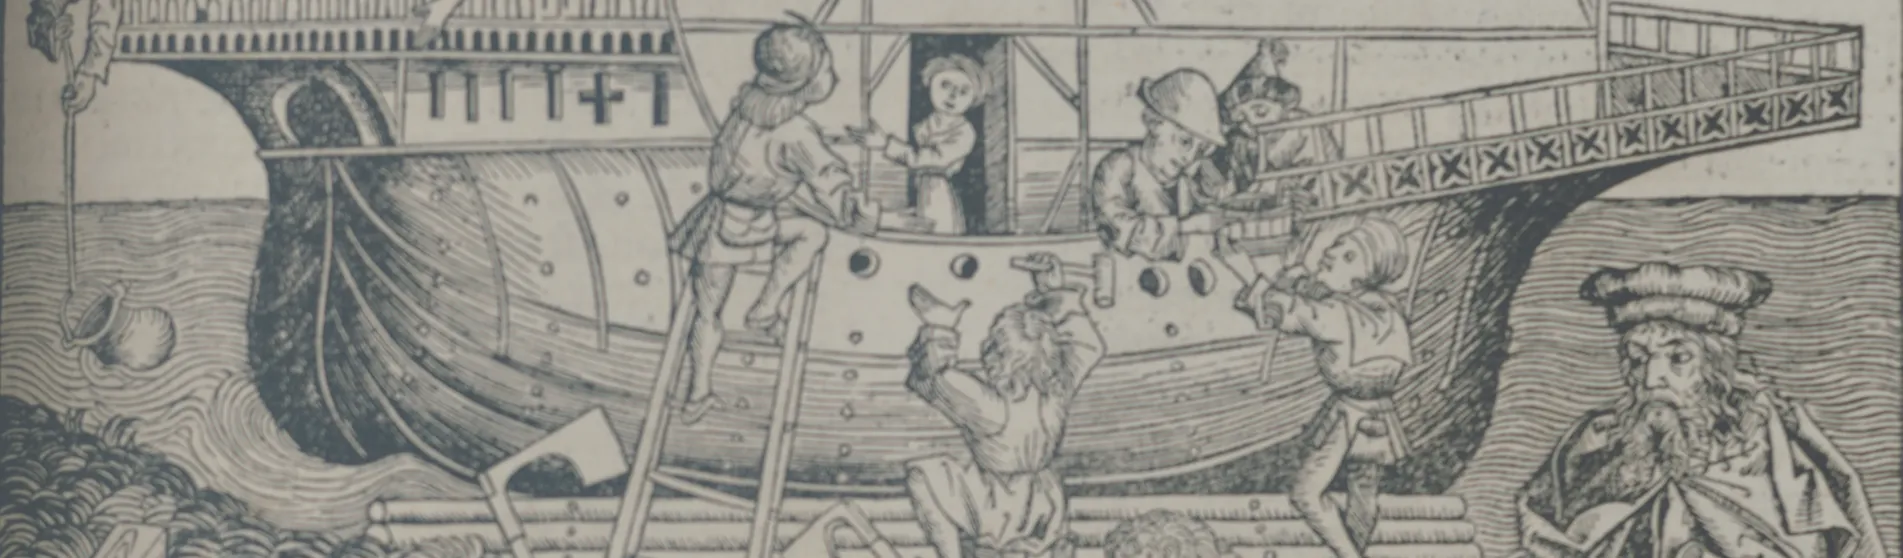 Woodcut of Noah's Ark from the Nuremberg Chronicle, 1493